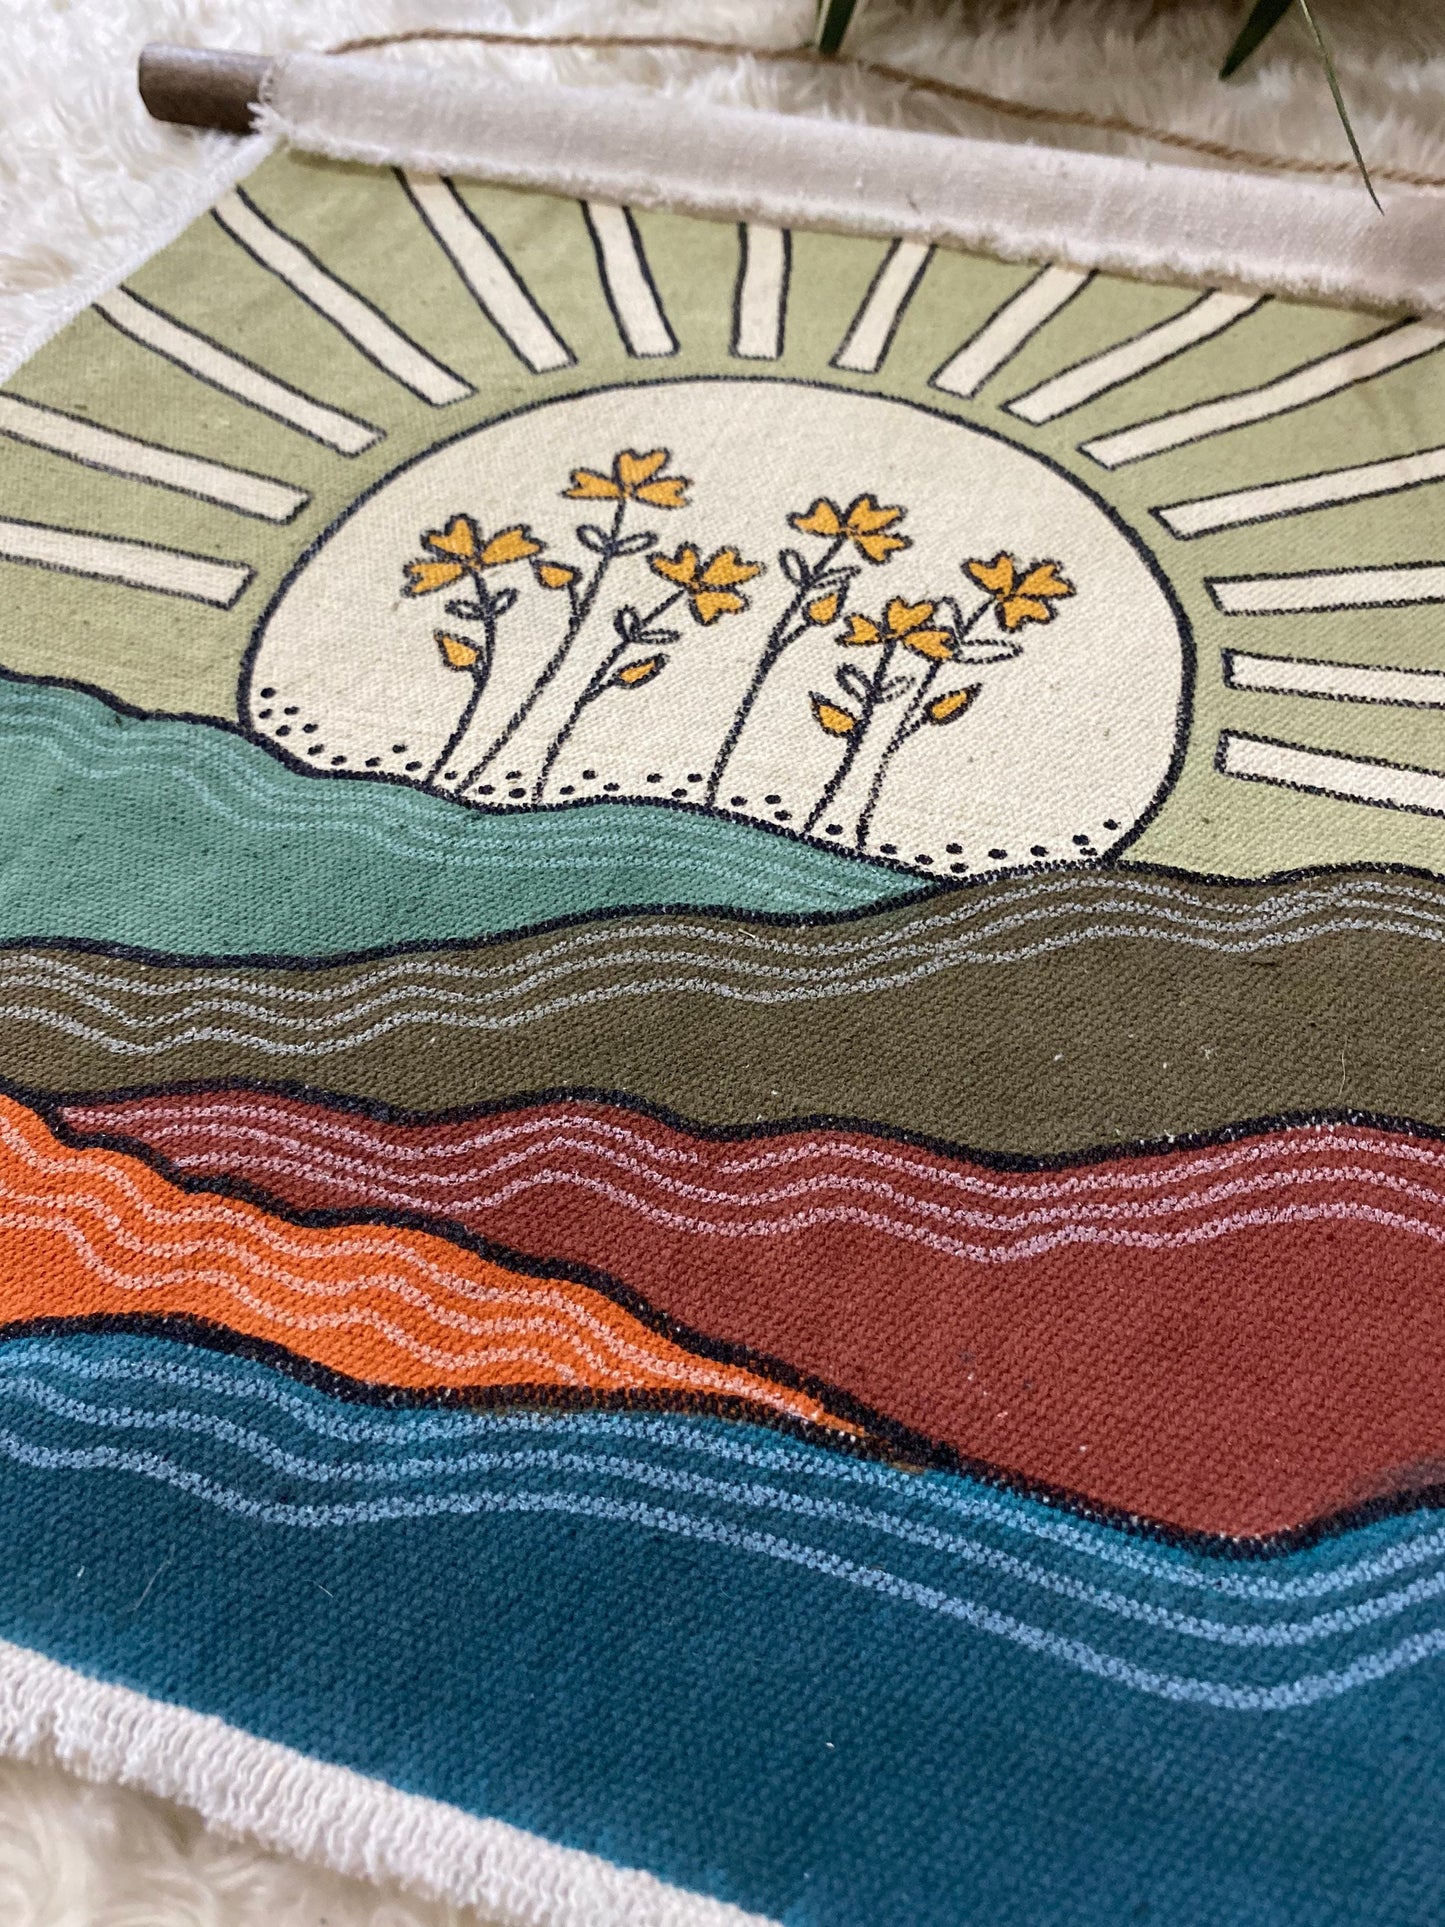 Sunrise Mountain Wall Tapestry